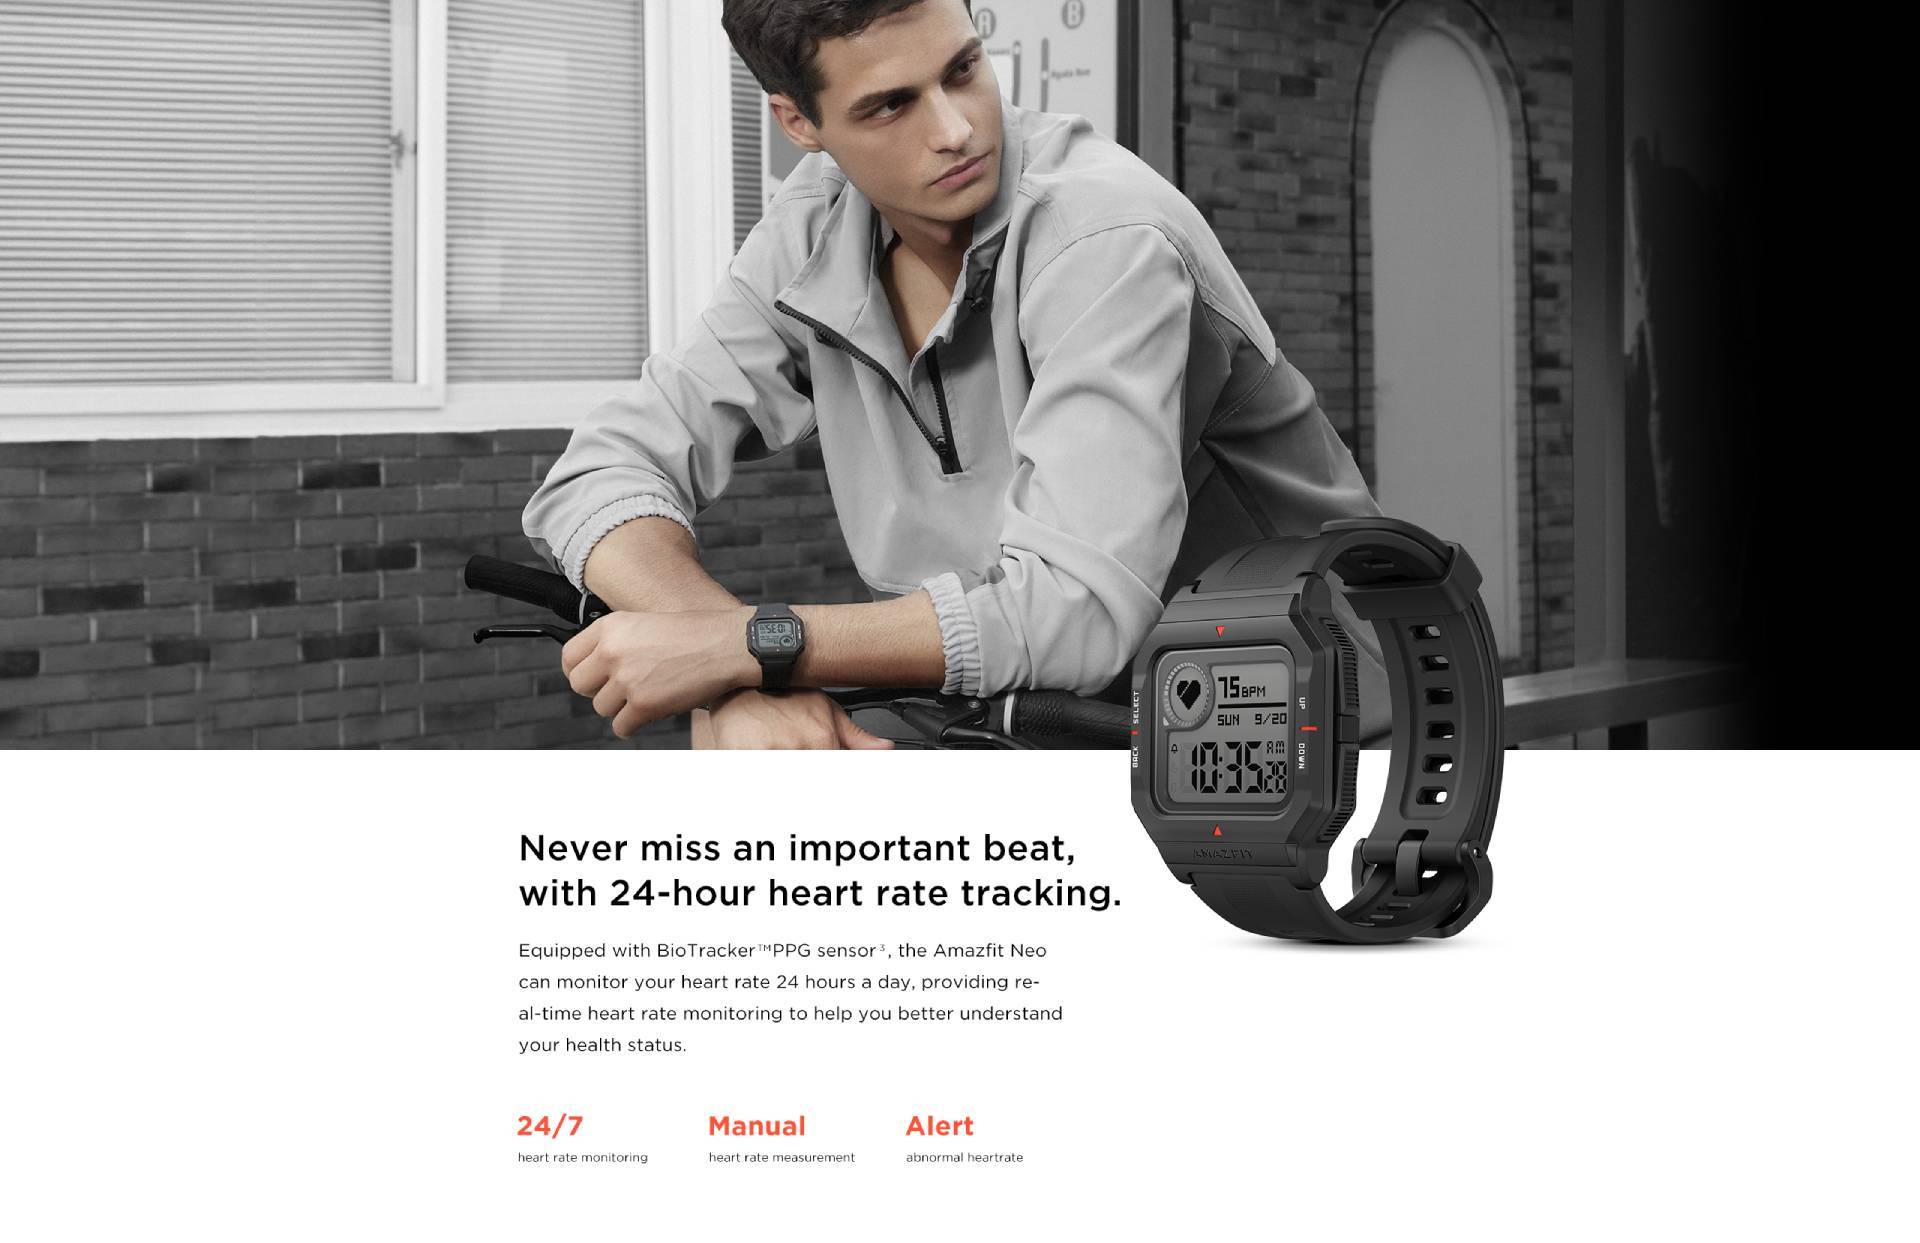 Amazfit Neo Digital Smart Watch 1.2 Inch STN Display BLE 5.0 3ATM  Waterproof 160MAH Bluetooth 5.0 For Android IOS